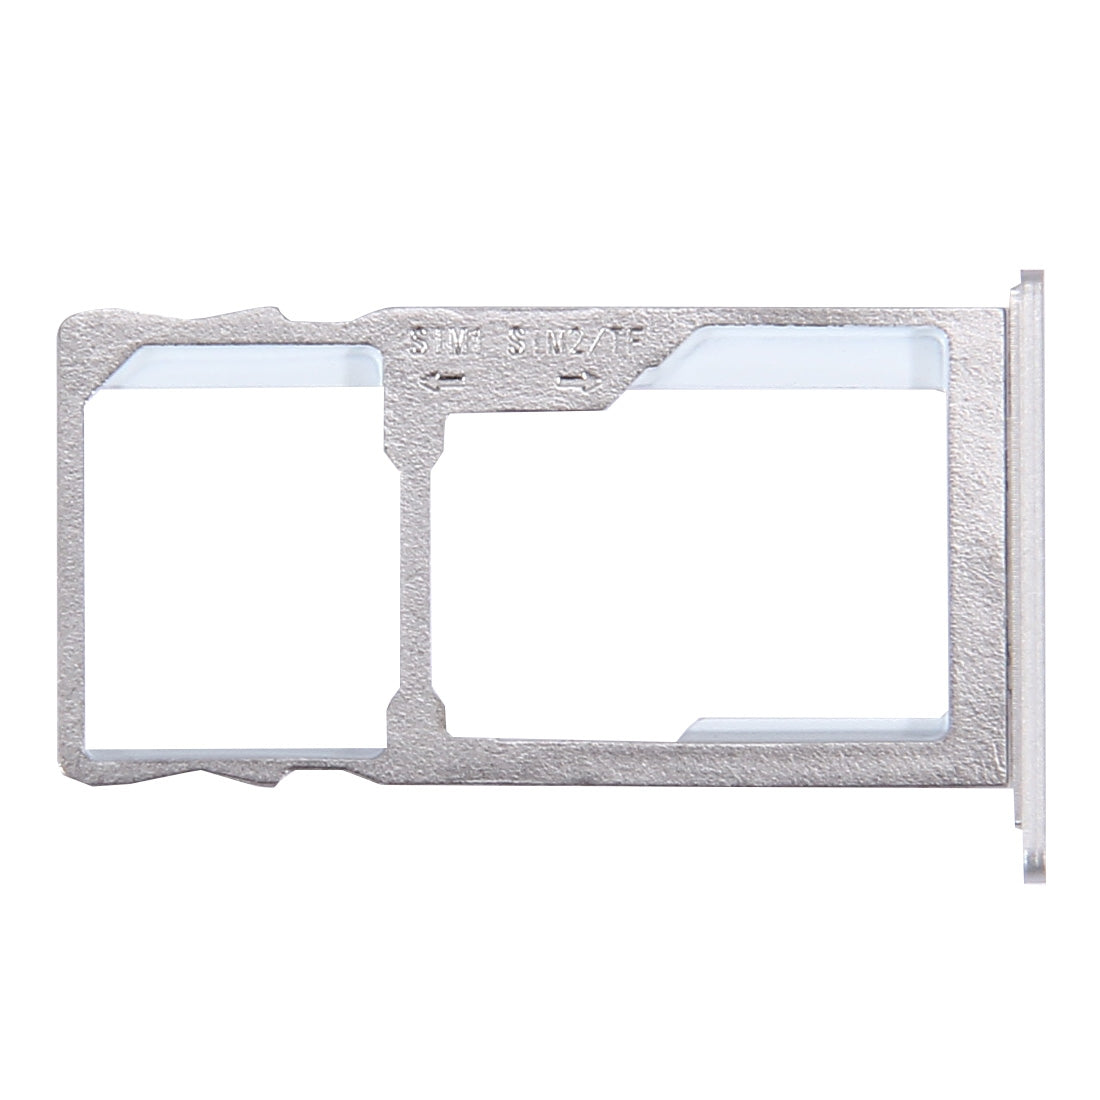 SIM / Micro SD Holder Tray for Meizu M3 Note / Meilan Note 3 Silver